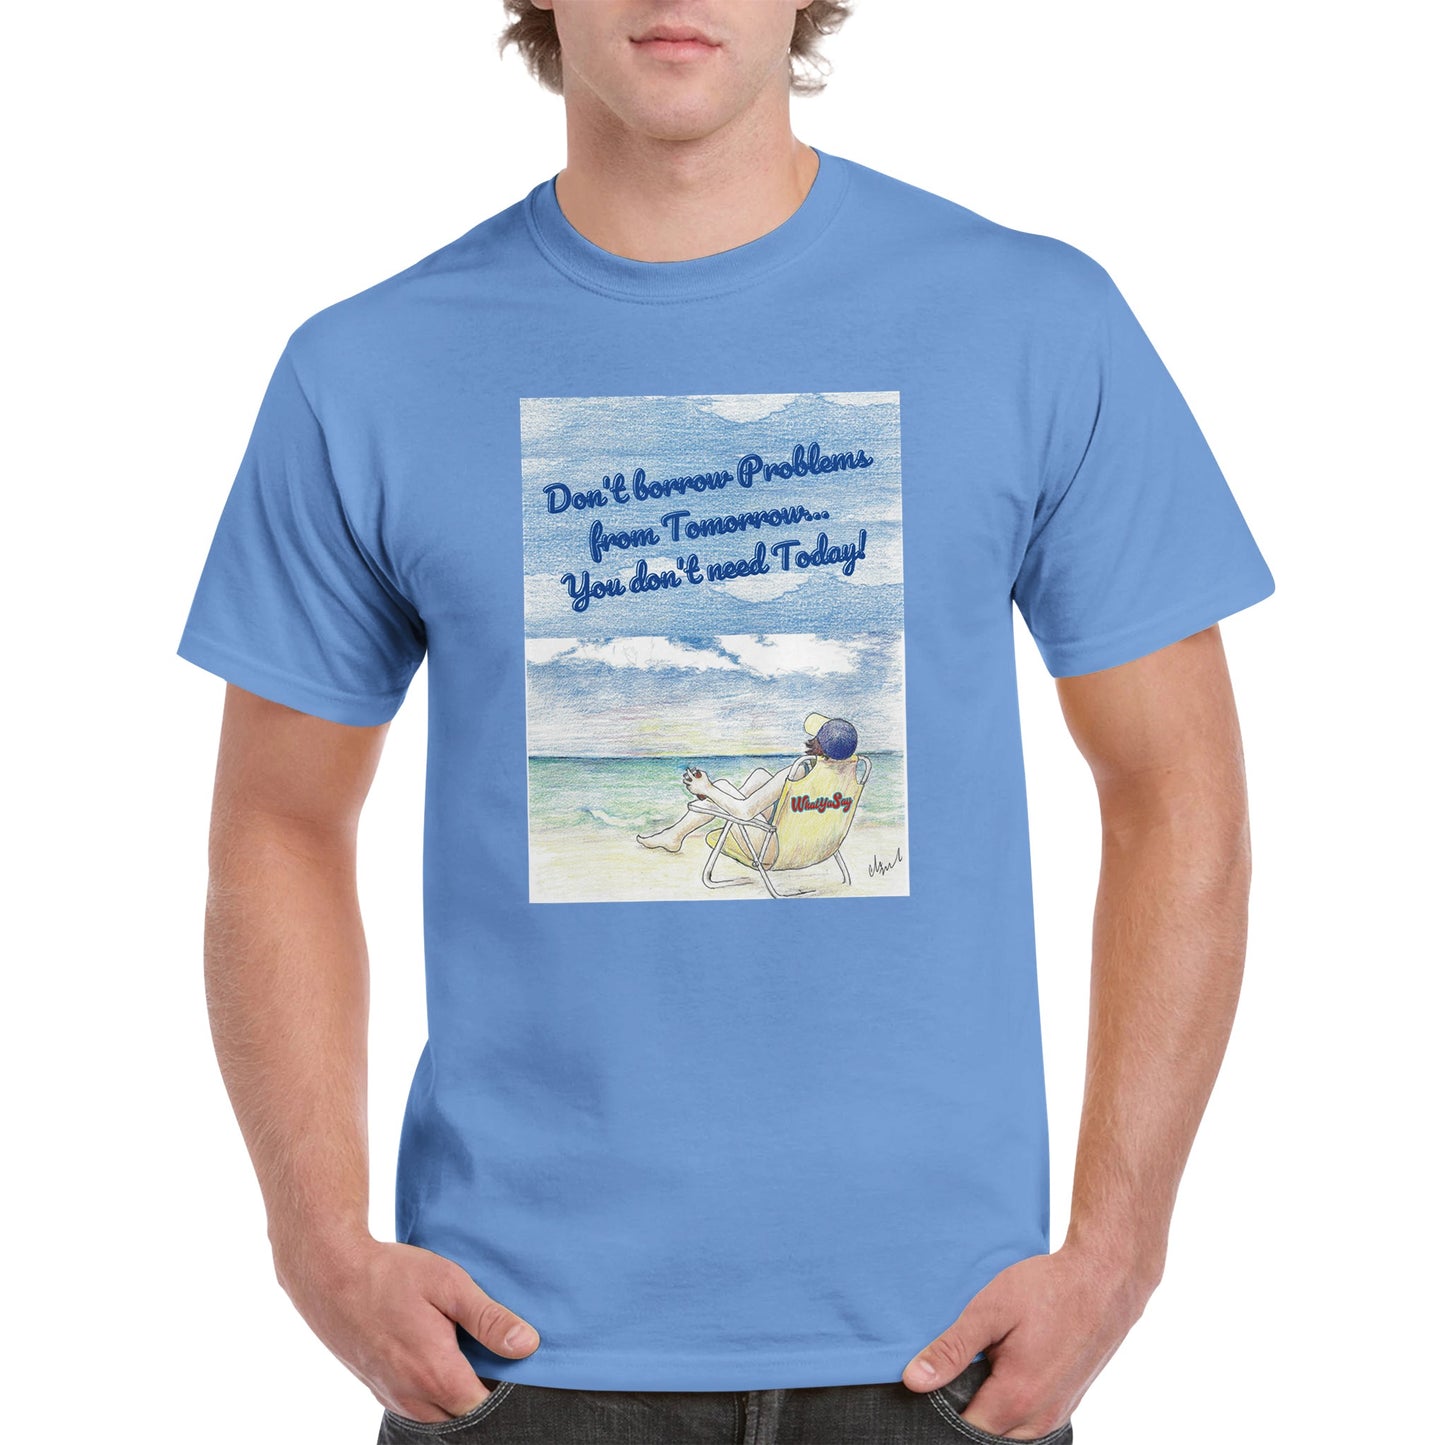 A Carolina Blue heavyweight Unisex Crewneck t-shirt with original artwork and motto Don’t borrow Problems from Tomorrow… You don’t need Today! on front with WhatYa Say logo on image from WhatYa Say Apparel worn by blonde-haired male front view.